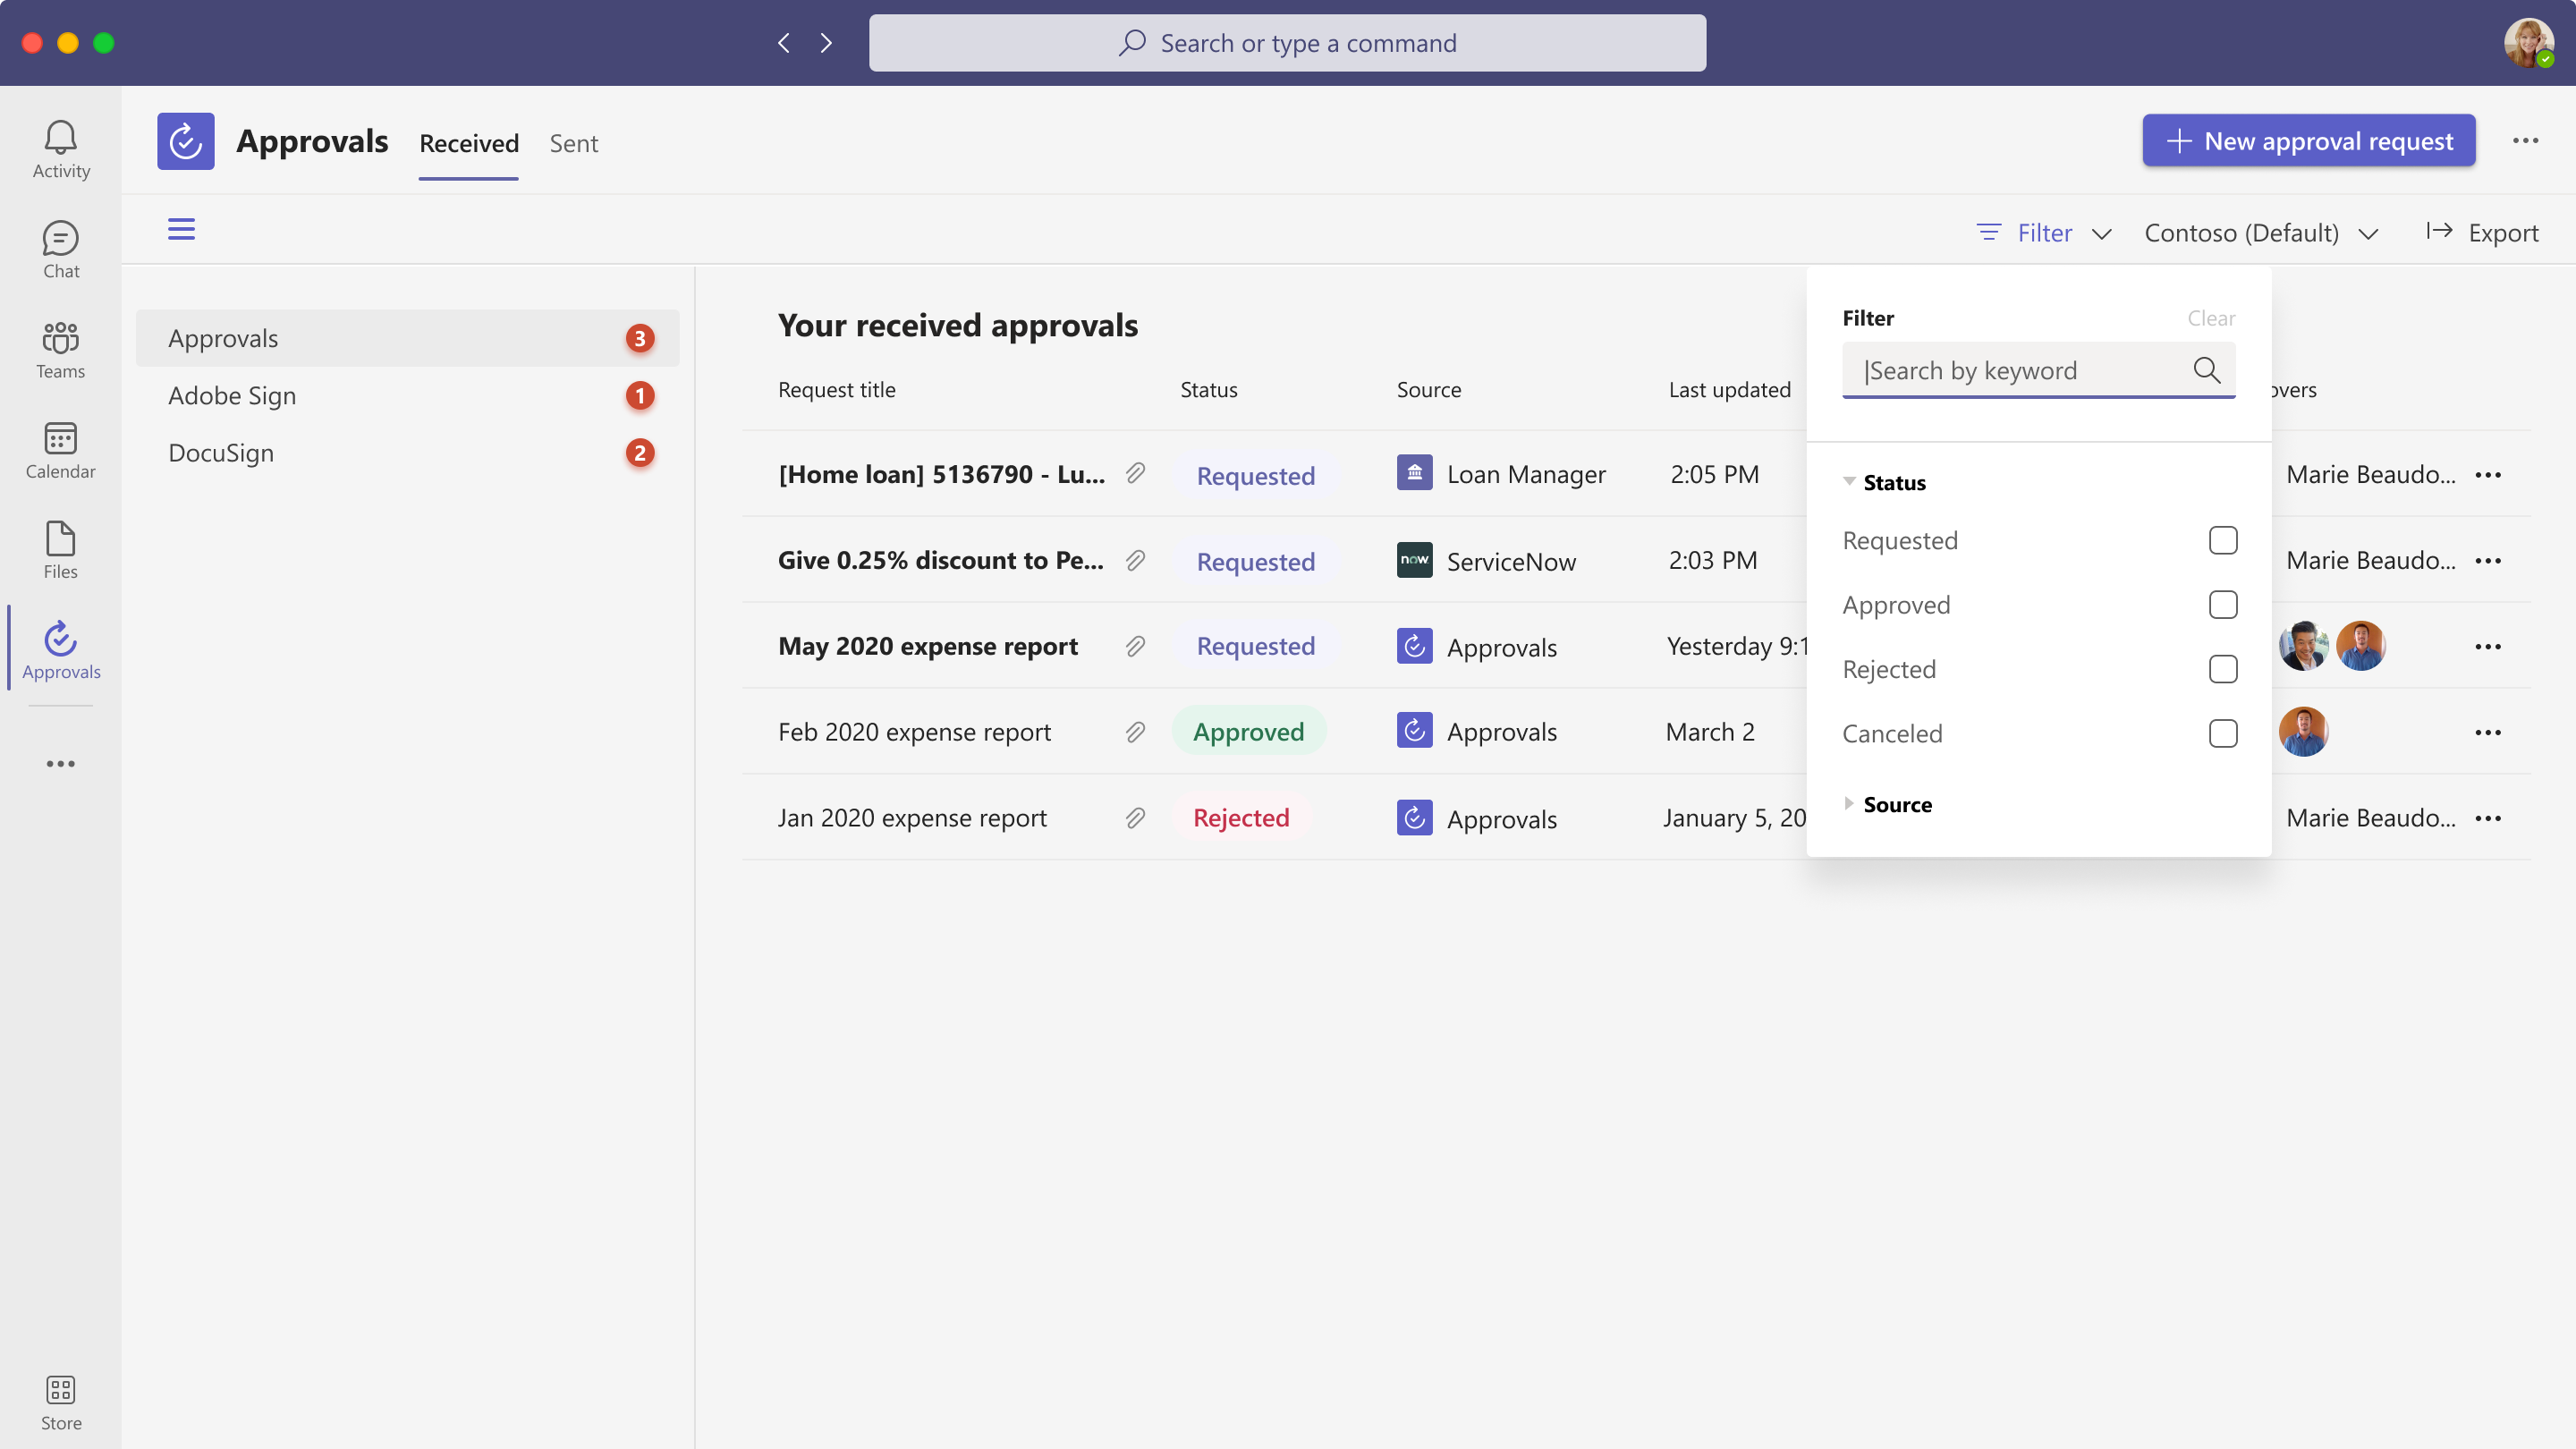 MC449930: Microsoft Teams: Additional Filters in Approvals